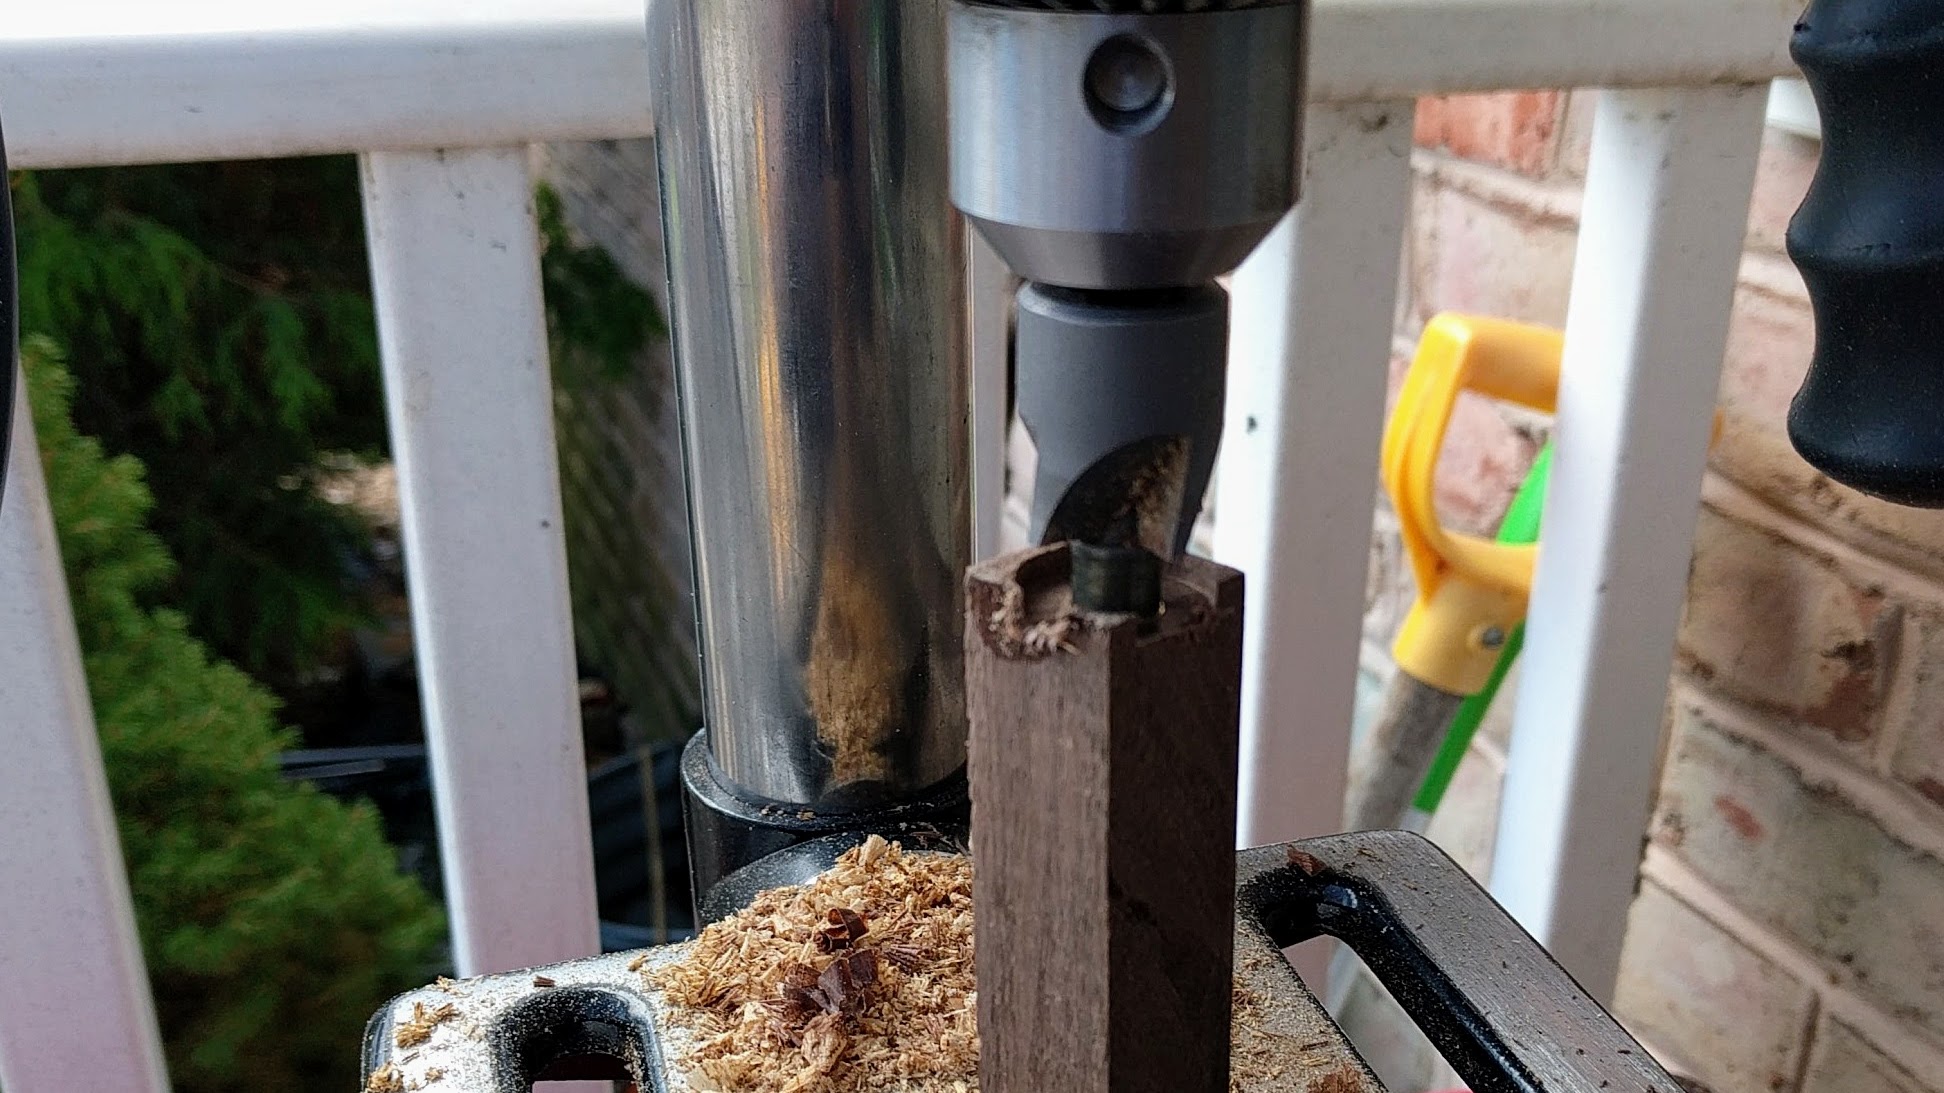 A drill press in action